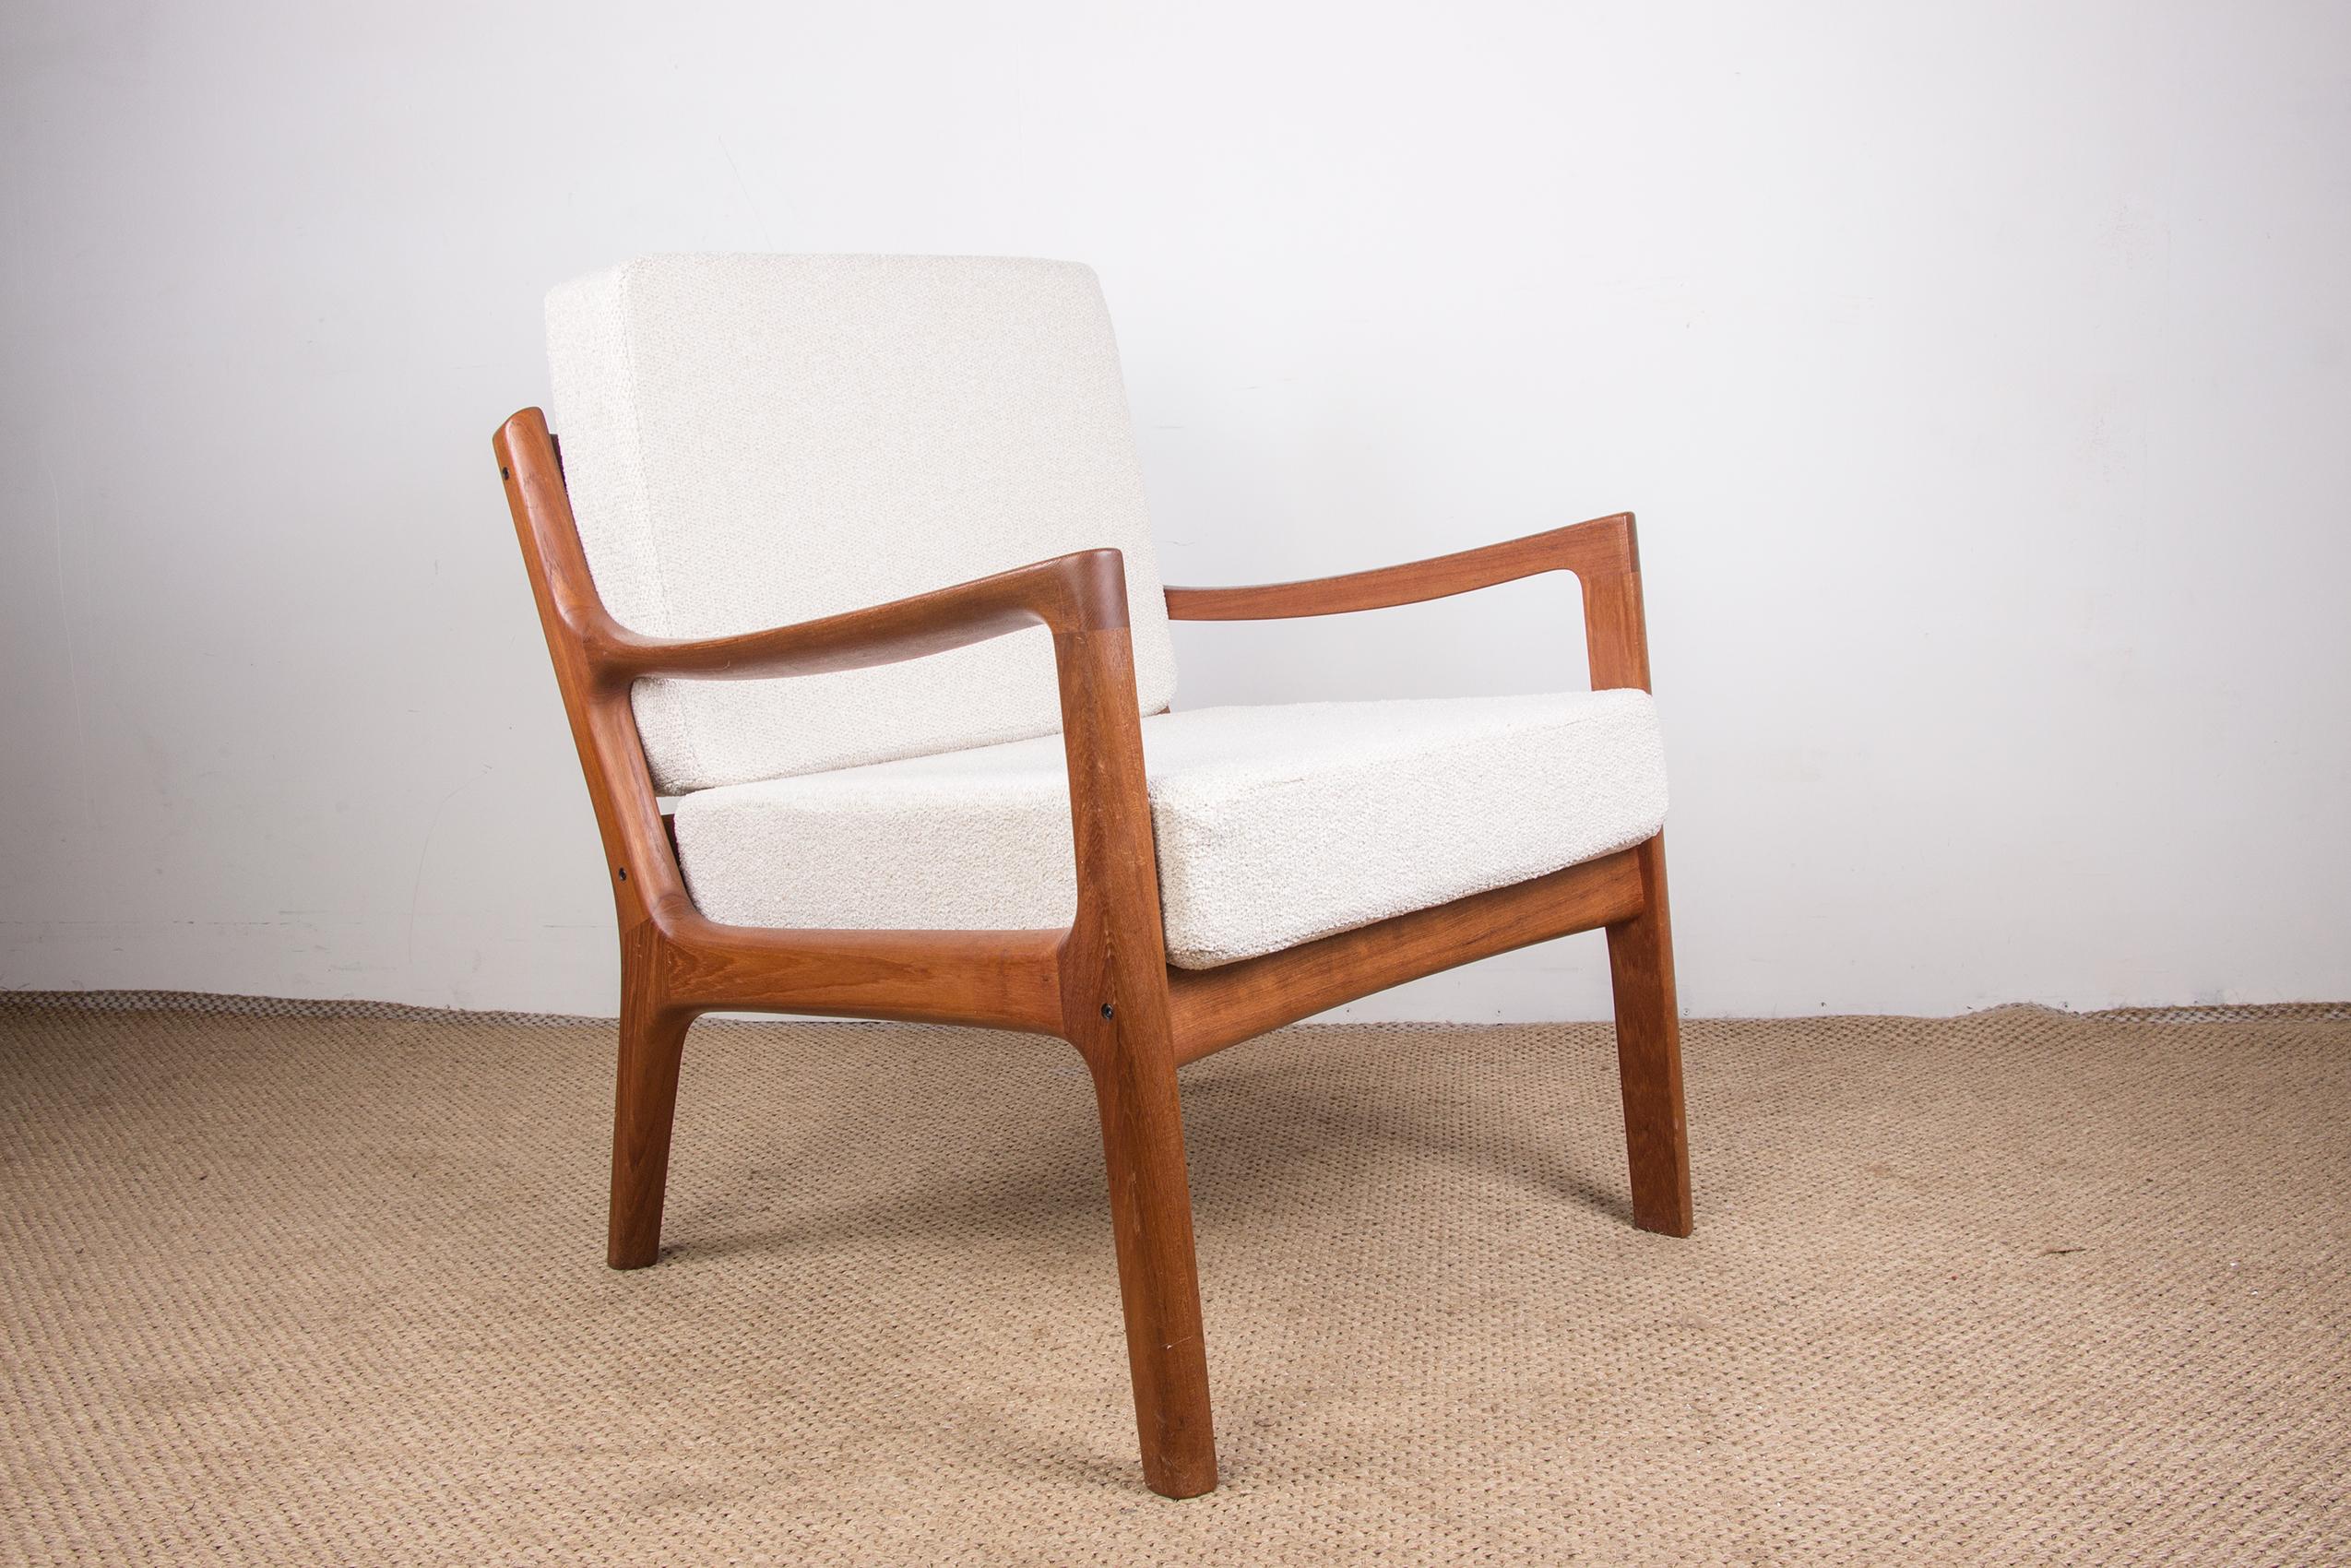 Mid-20th Century Danish Armchair in Teak and New Fabric, Model Senator, Ole Wanscher for France